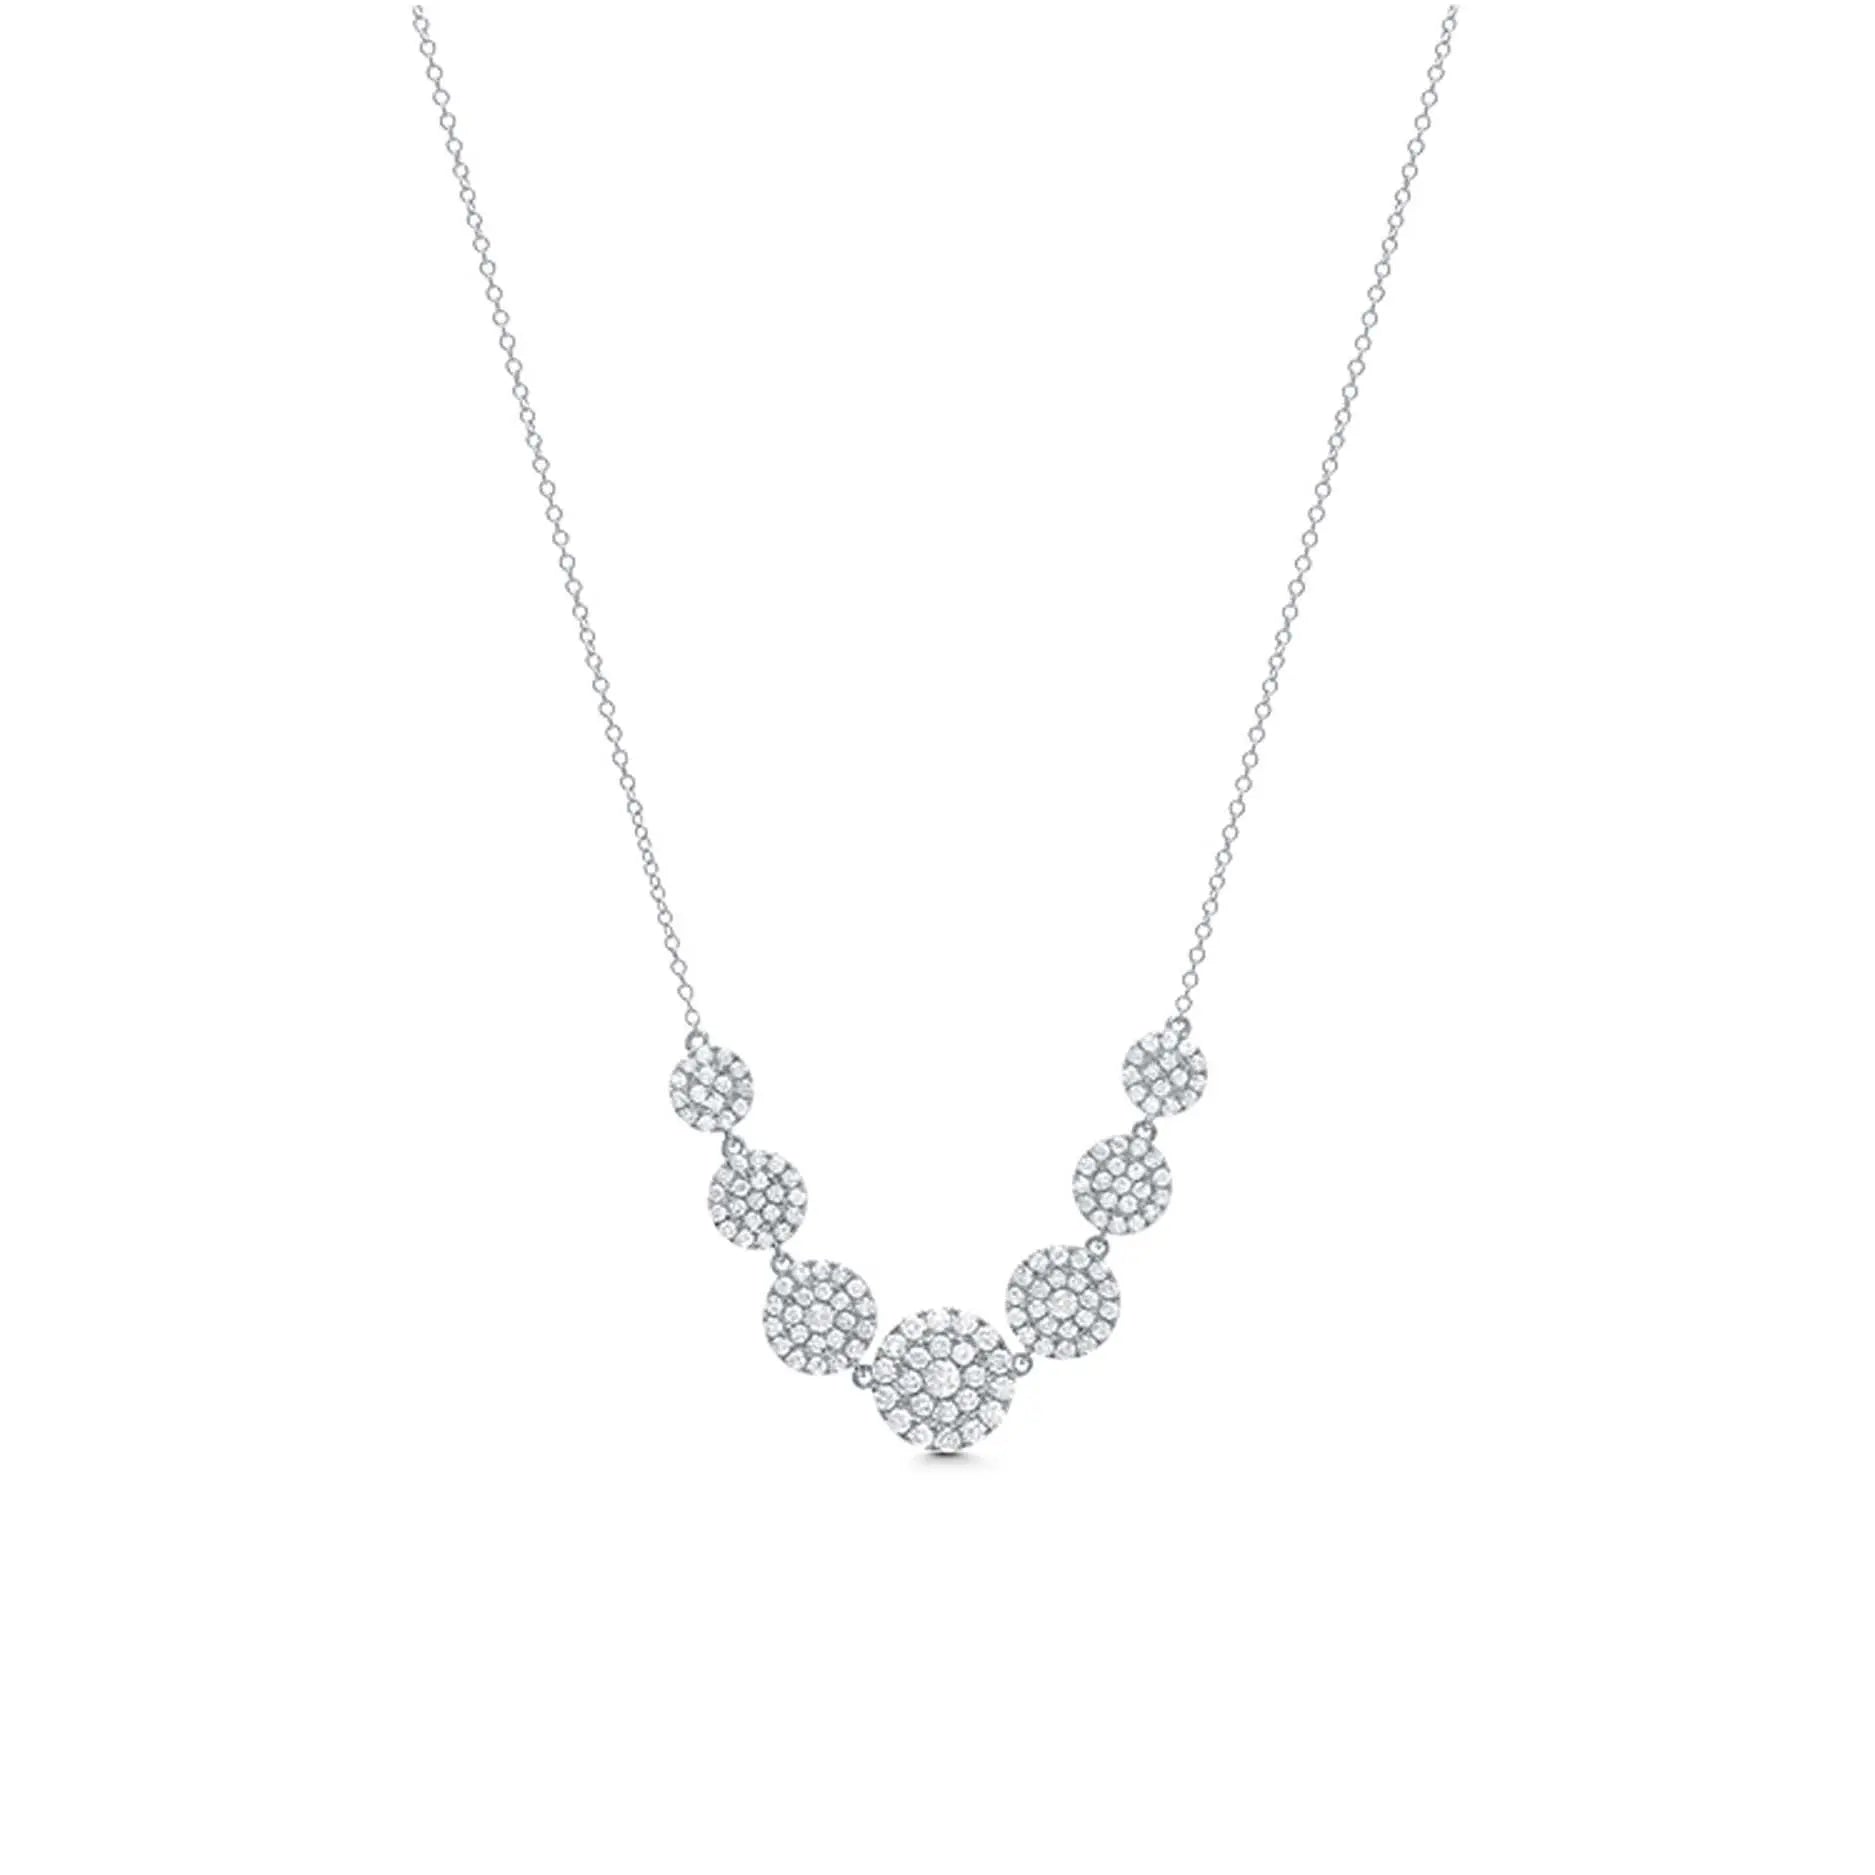 18k white gold diamond cascade necklace with 1.57 total cttw.   Details:  Gemstone:  1.57 Carats of G-H Color White Diamonds Metal: 18K Gold, 6.21 Grams Sizing:  Necklace 18 inches with a jump ring at 16 inches  Designed by Graziela Gems